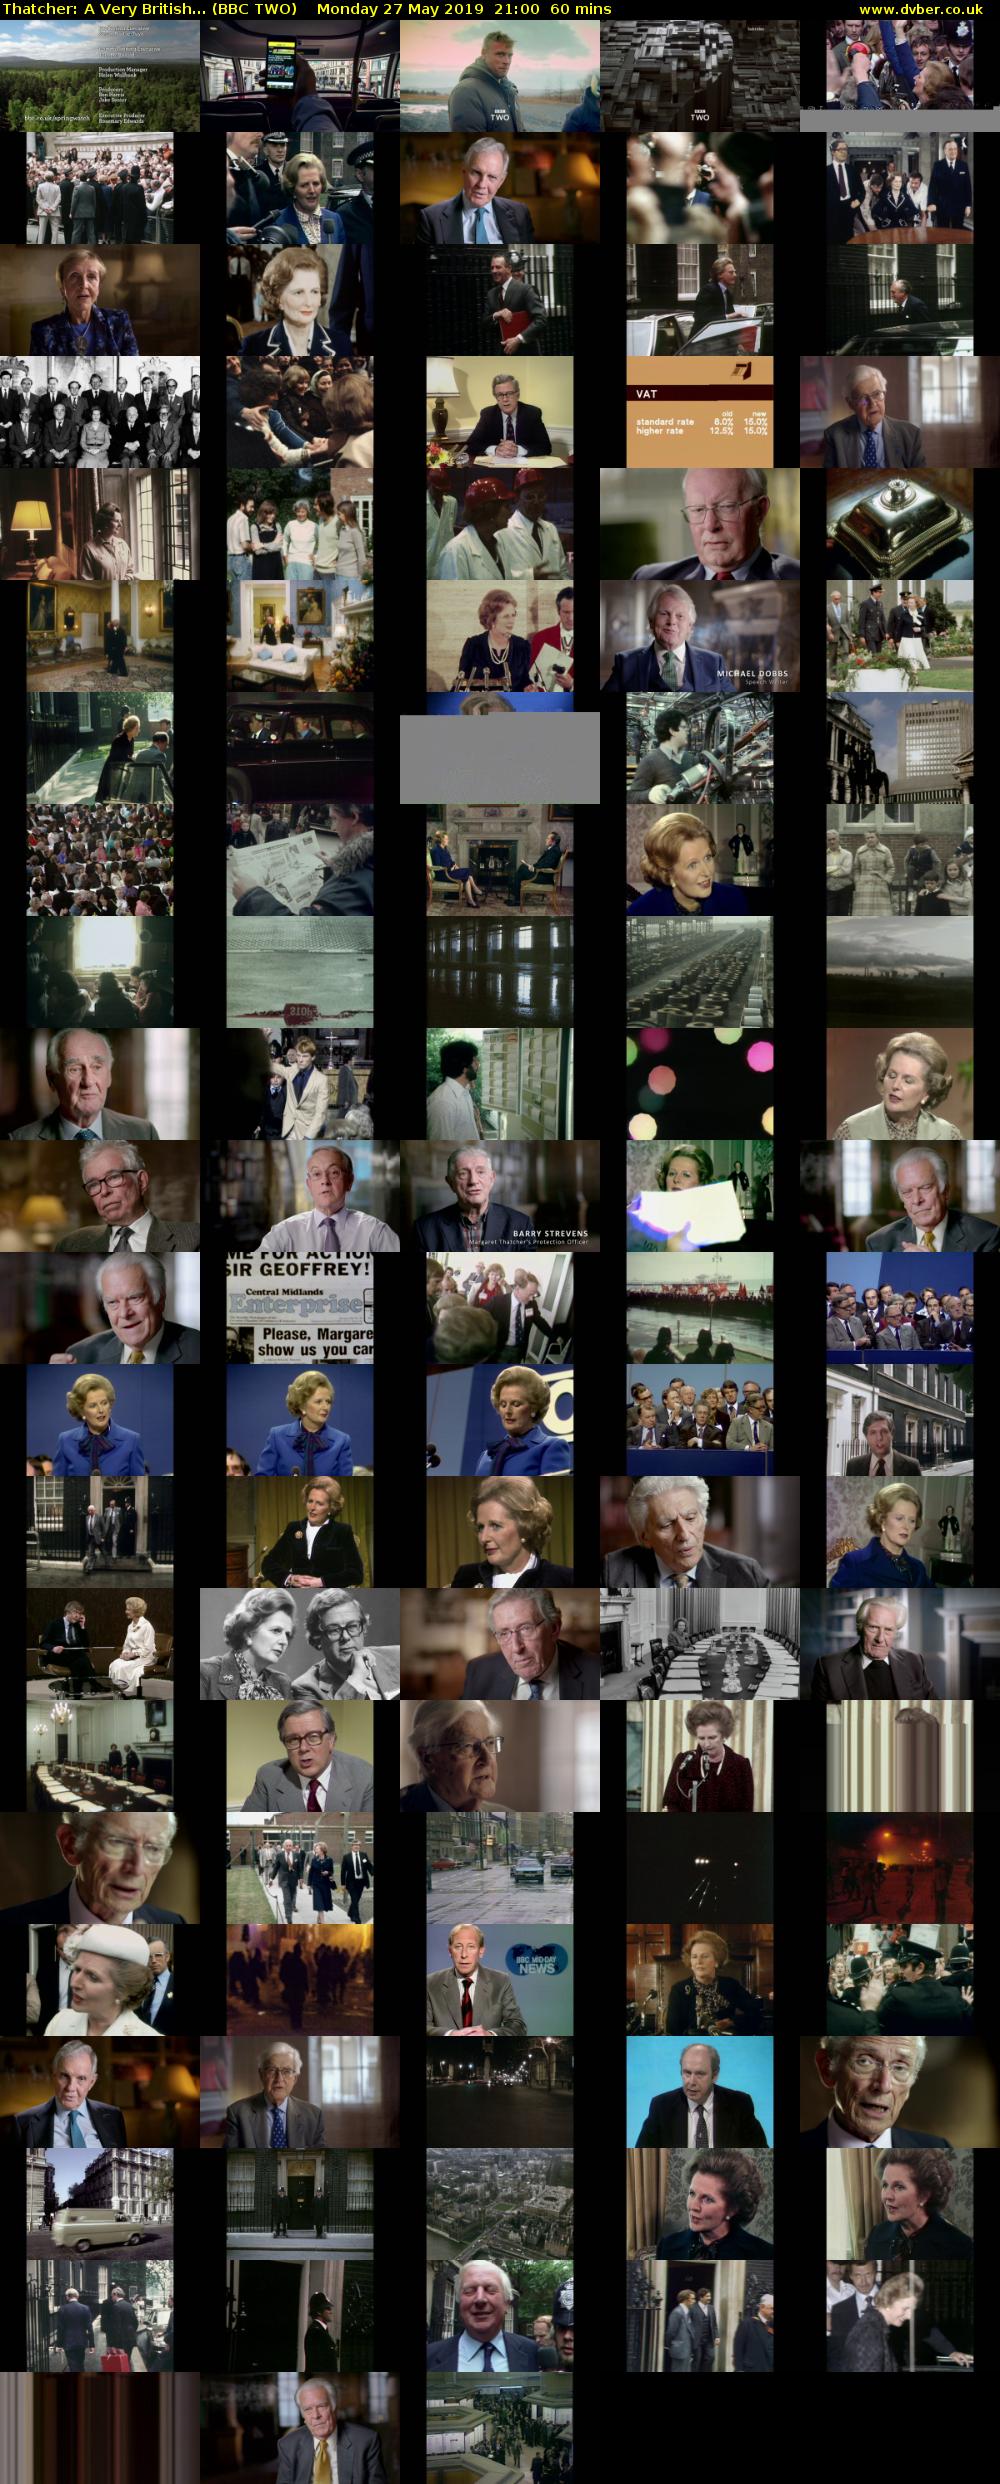 Thatcher: A Very British... (BBC TWO) Monday 27 May 2019 21:00 - 22:00